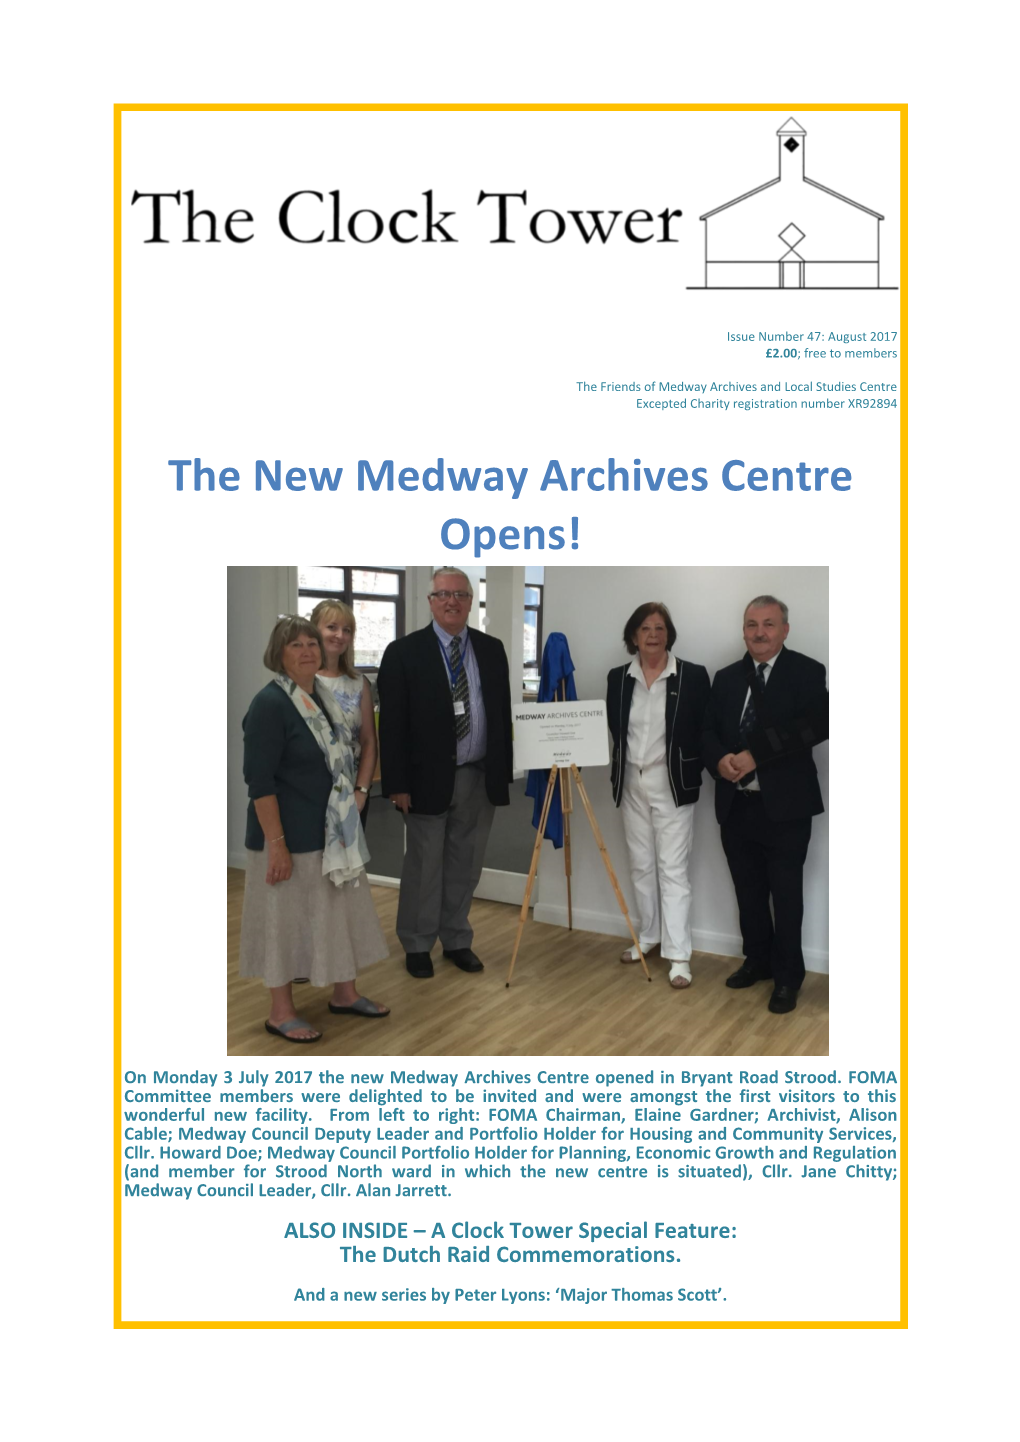 The New Medway Archives Centre Opens!